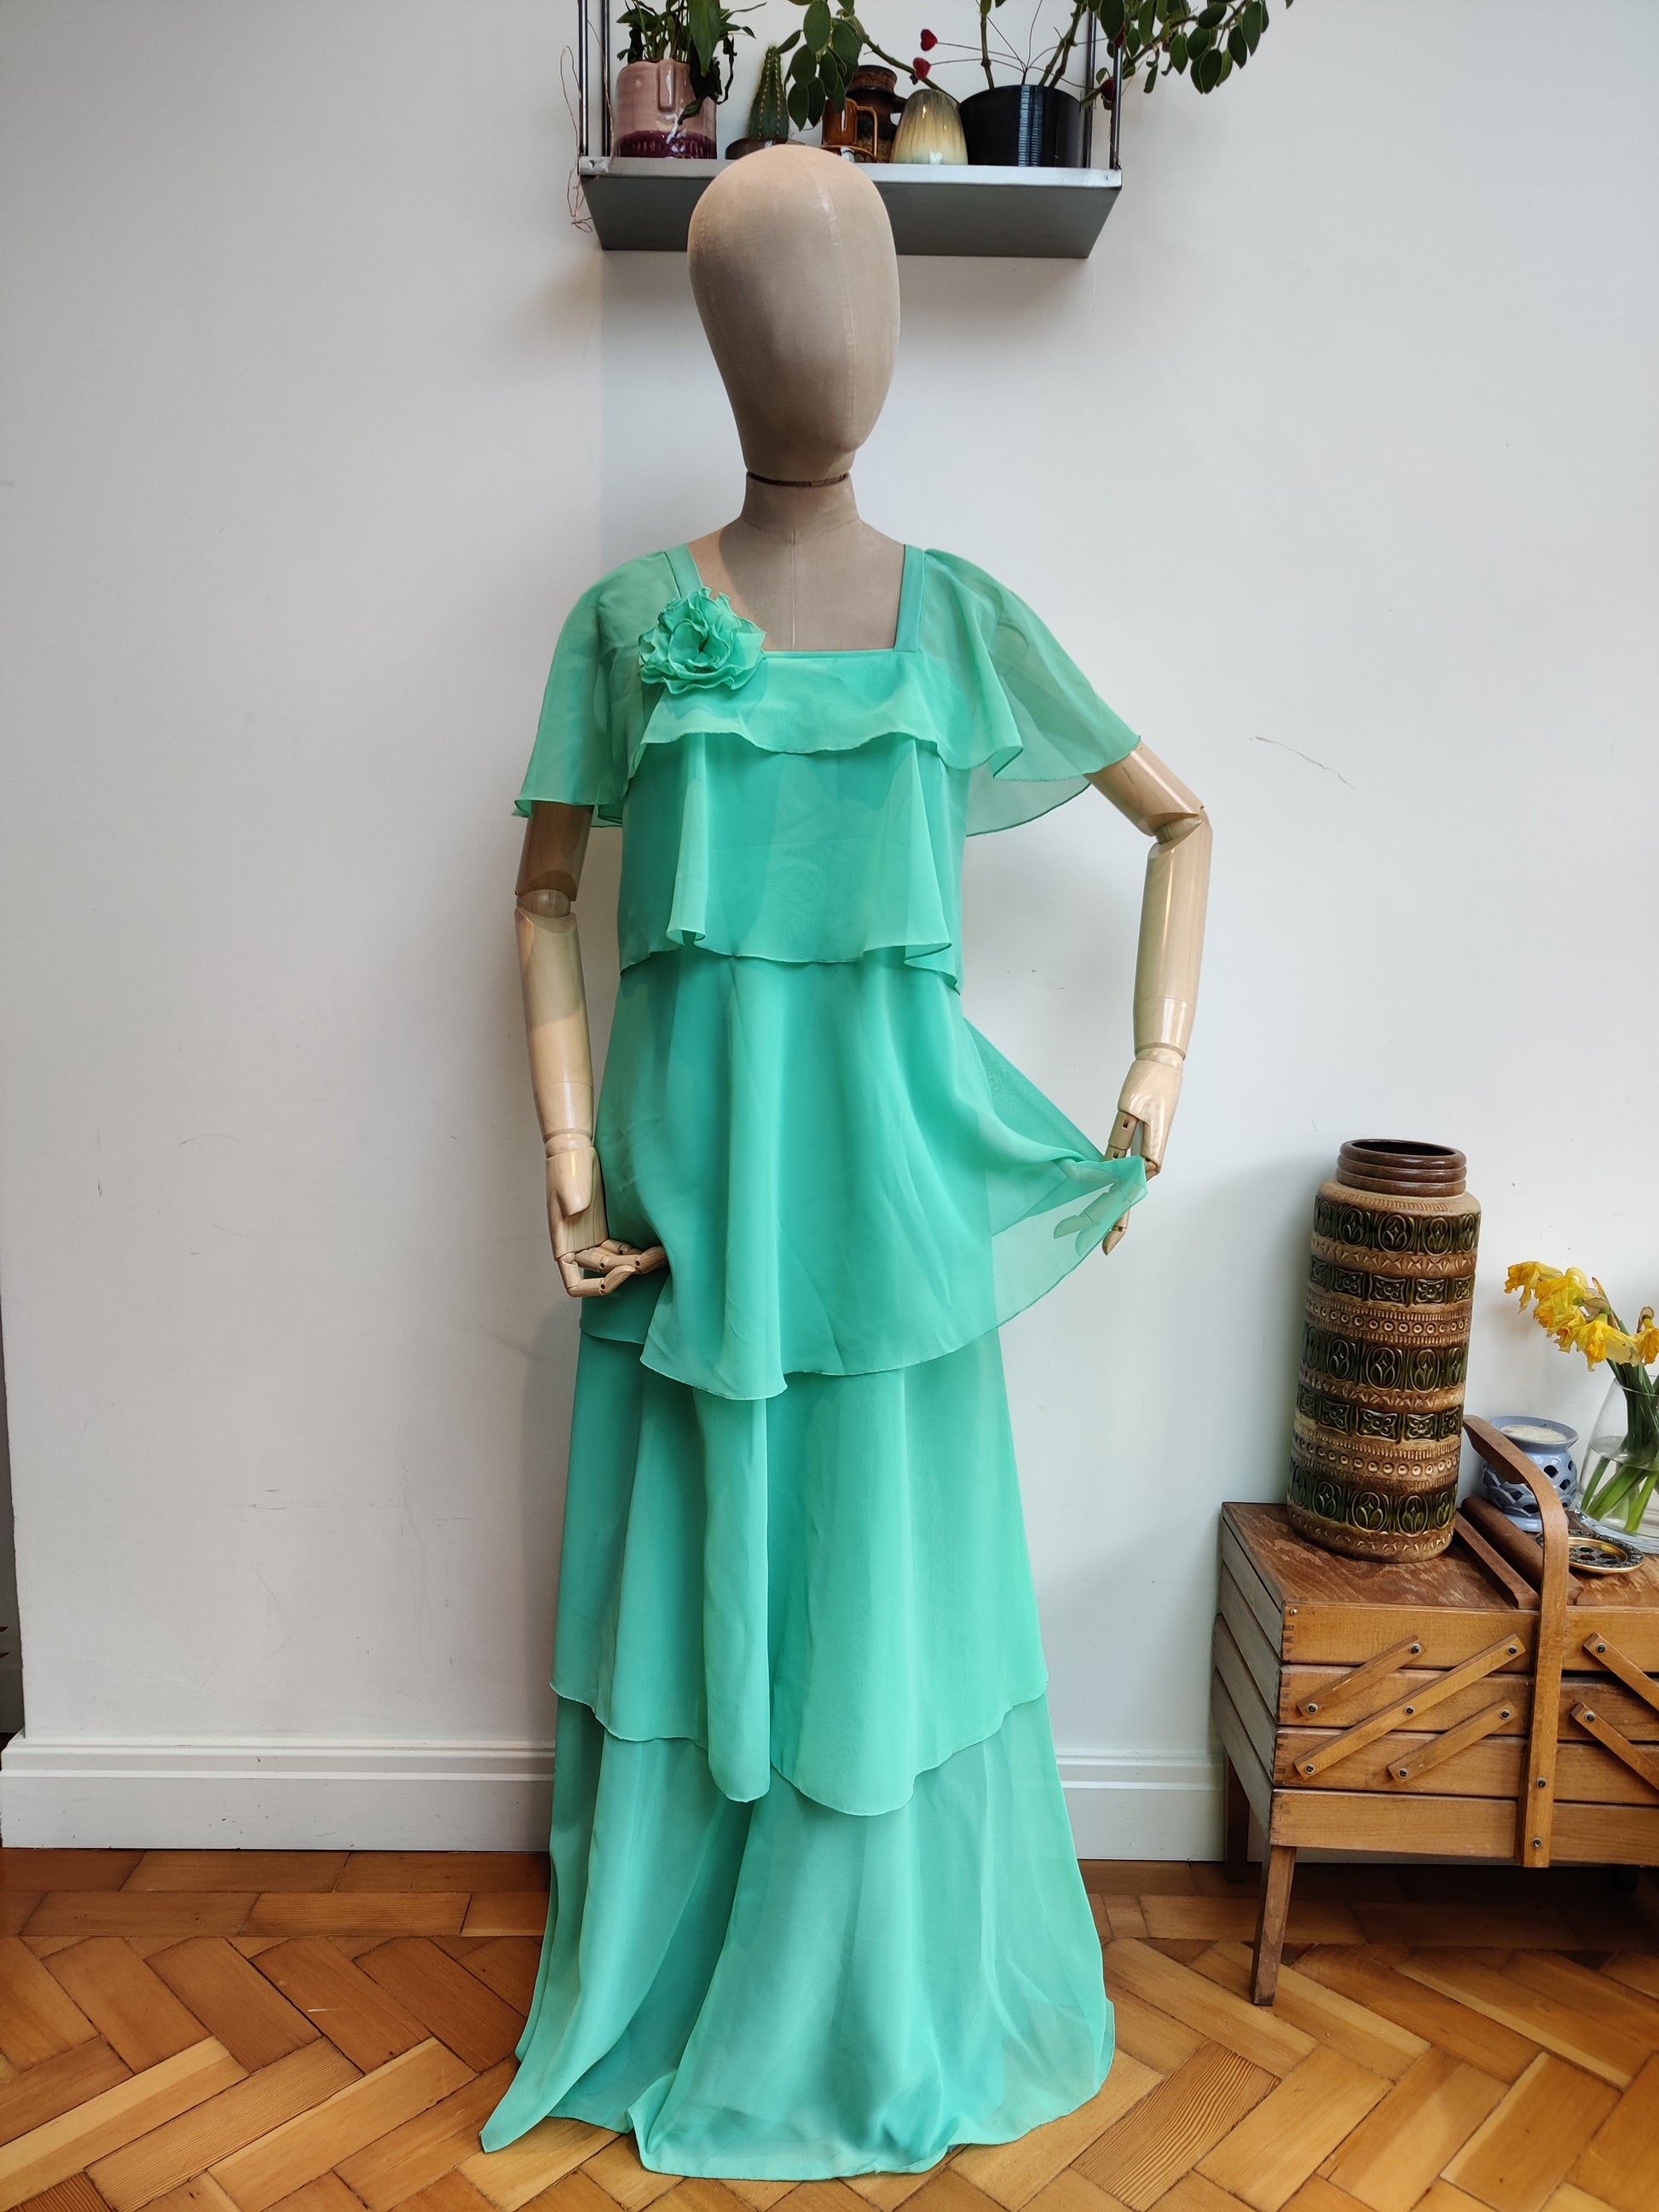 Stunning mint green vintage maxi dress with flower corsage.